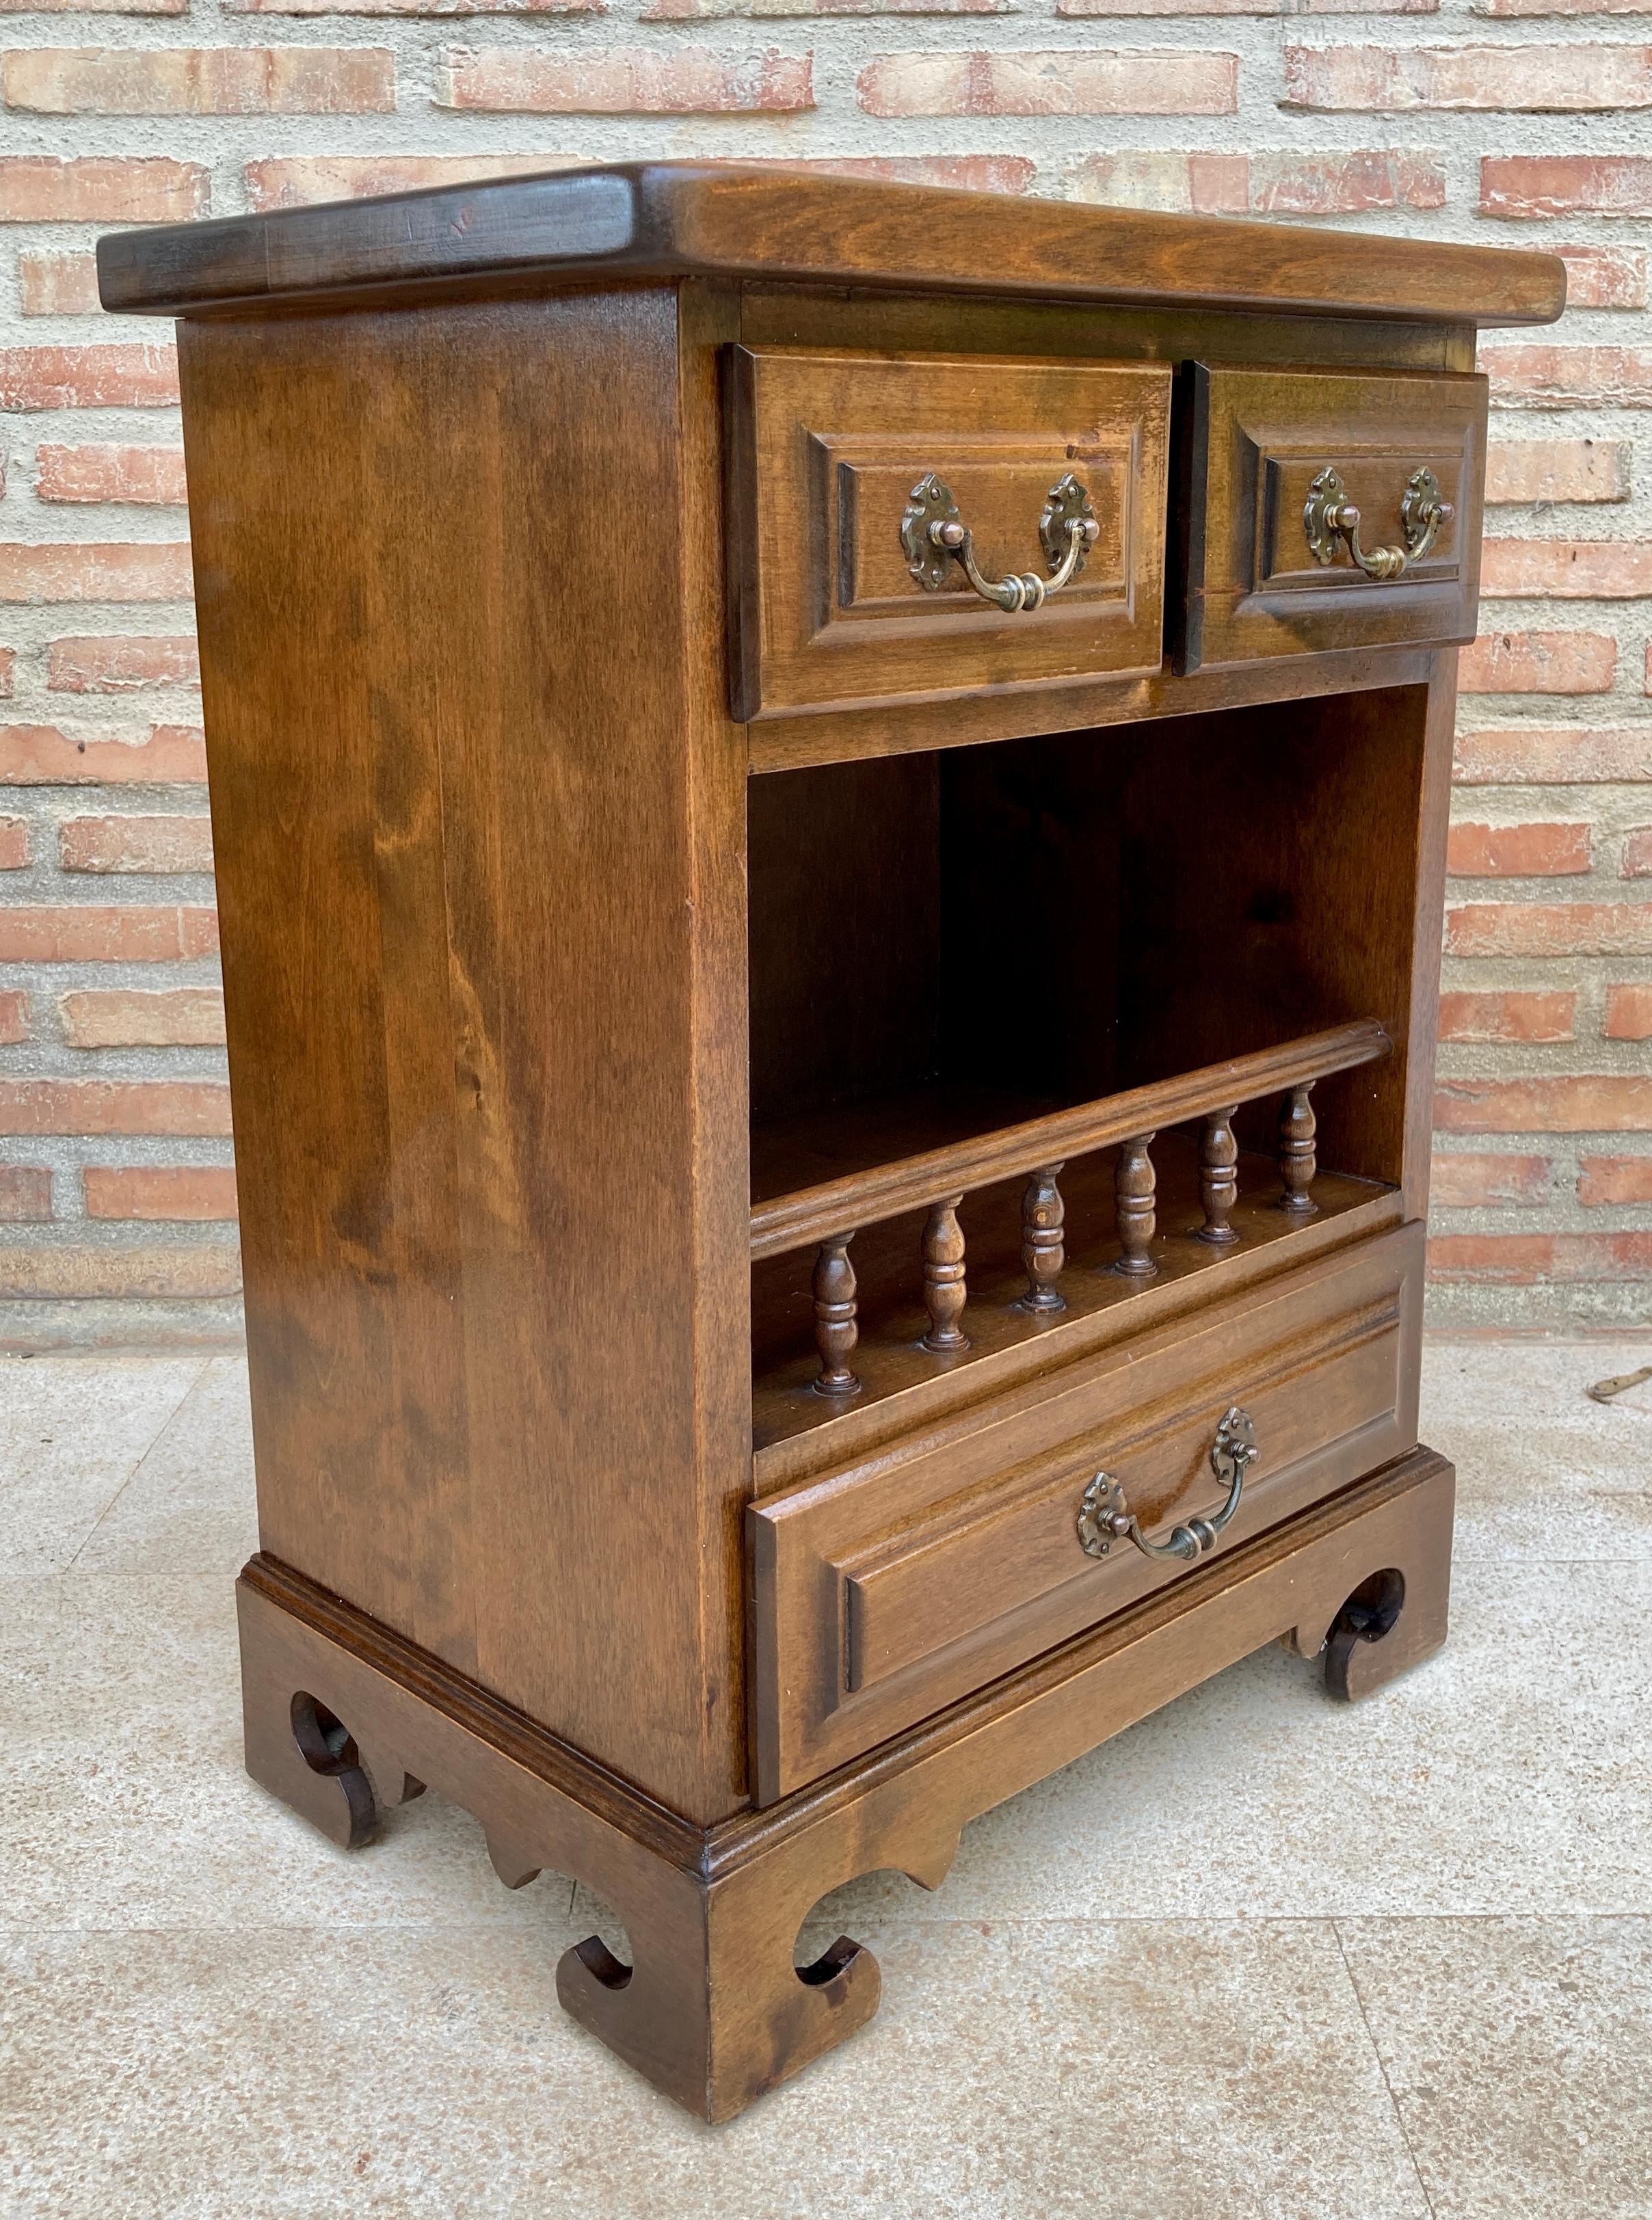 20th Spanish Nightstands With Three Drawers One Shelf And Bronze Hardware 1970s, For Sale 1